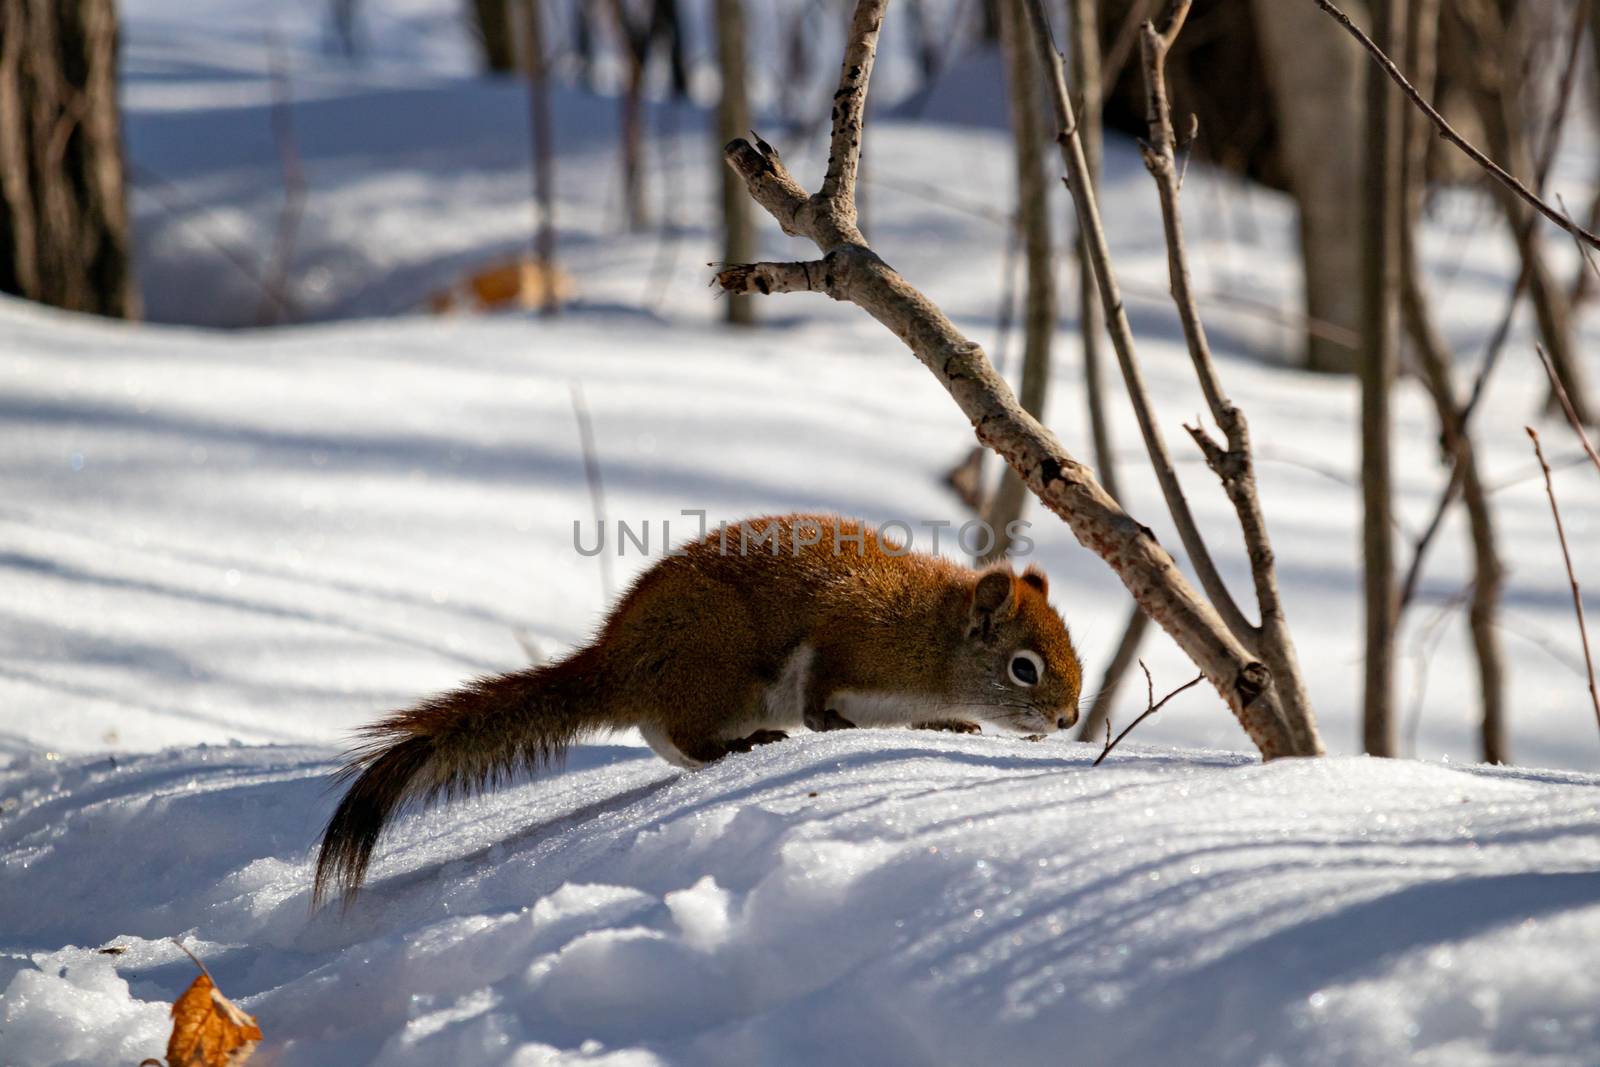 A Squirrel Forages For Fallen Seeds in the Snow by colintemple